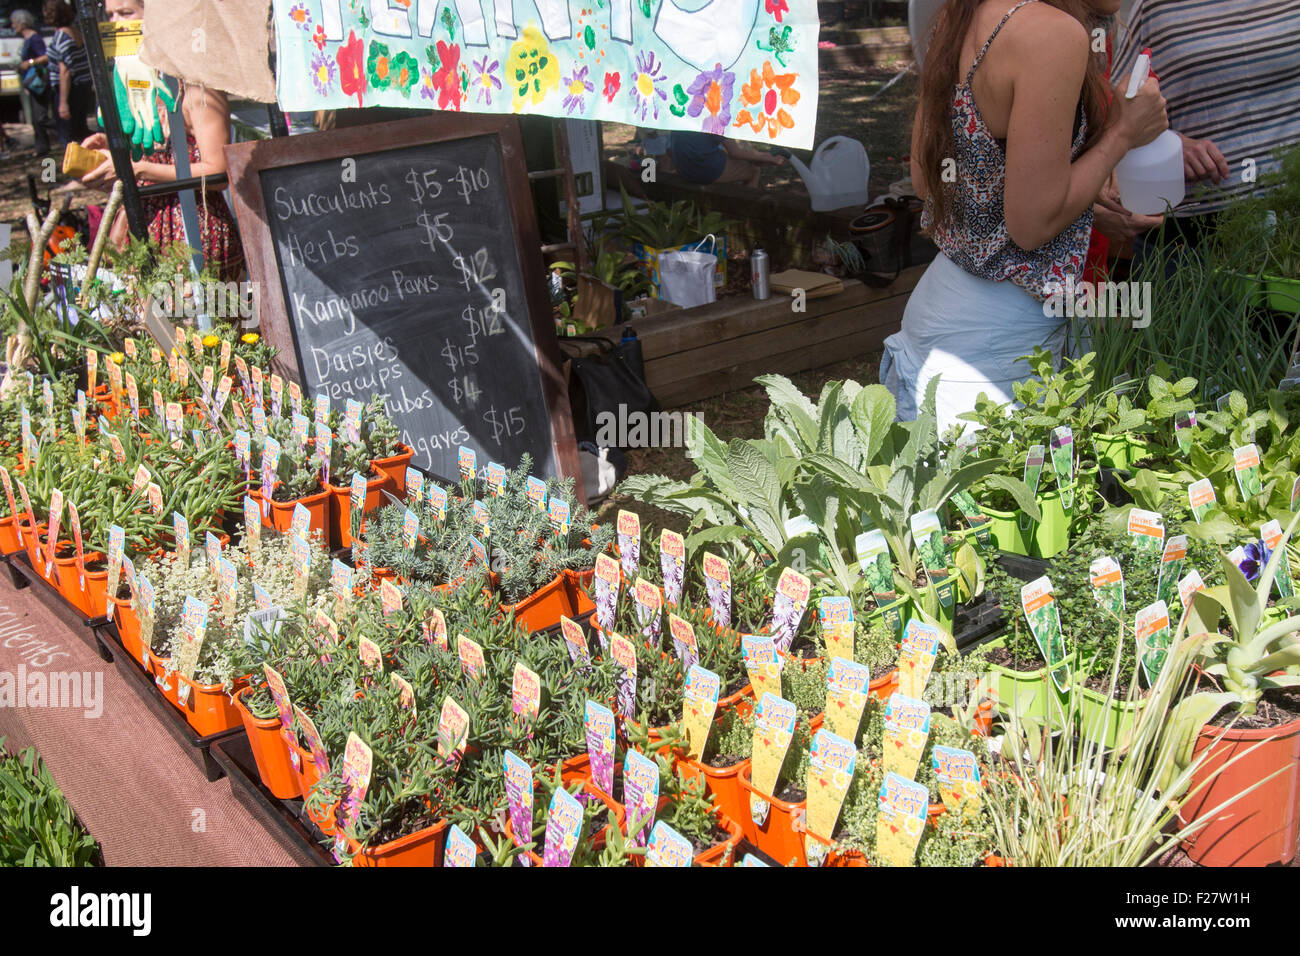 Plant stall outside at Sydney primary school hosts the local community fete fair to raise funds for the school, Avalon,Sydney, Australia Stock Photo